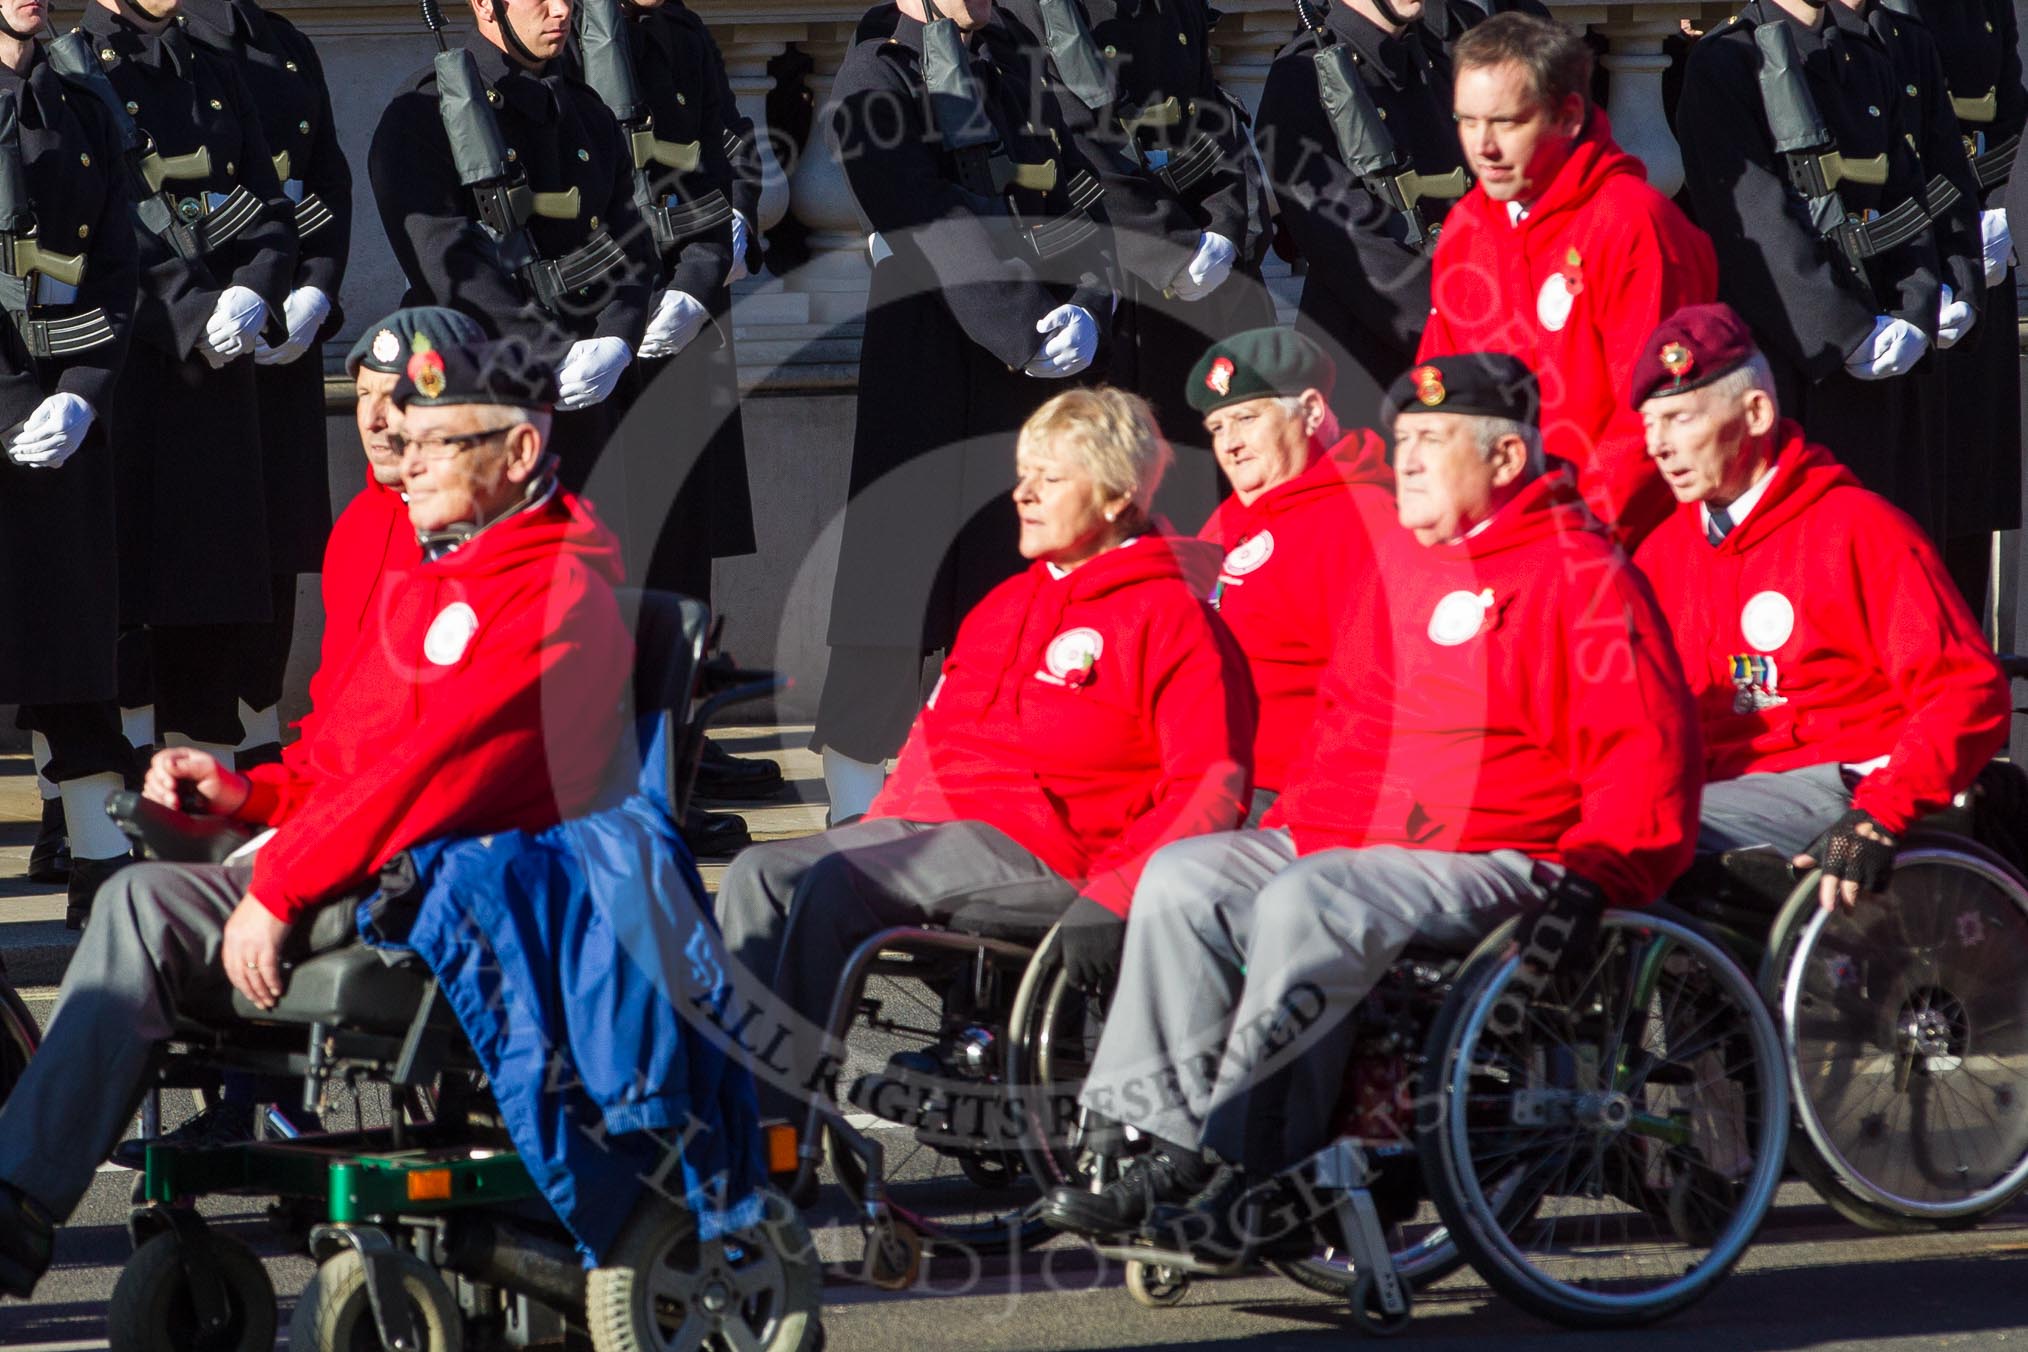 Remembrance Sunday 2012 Cenotaph March Past: Group E42 - British Ex-Services Wheelchair Sports Association..
Whitehall, Cenotaph,
London SW1,

United Kingdom,
on 11 November 2012 at 11:43, image #326